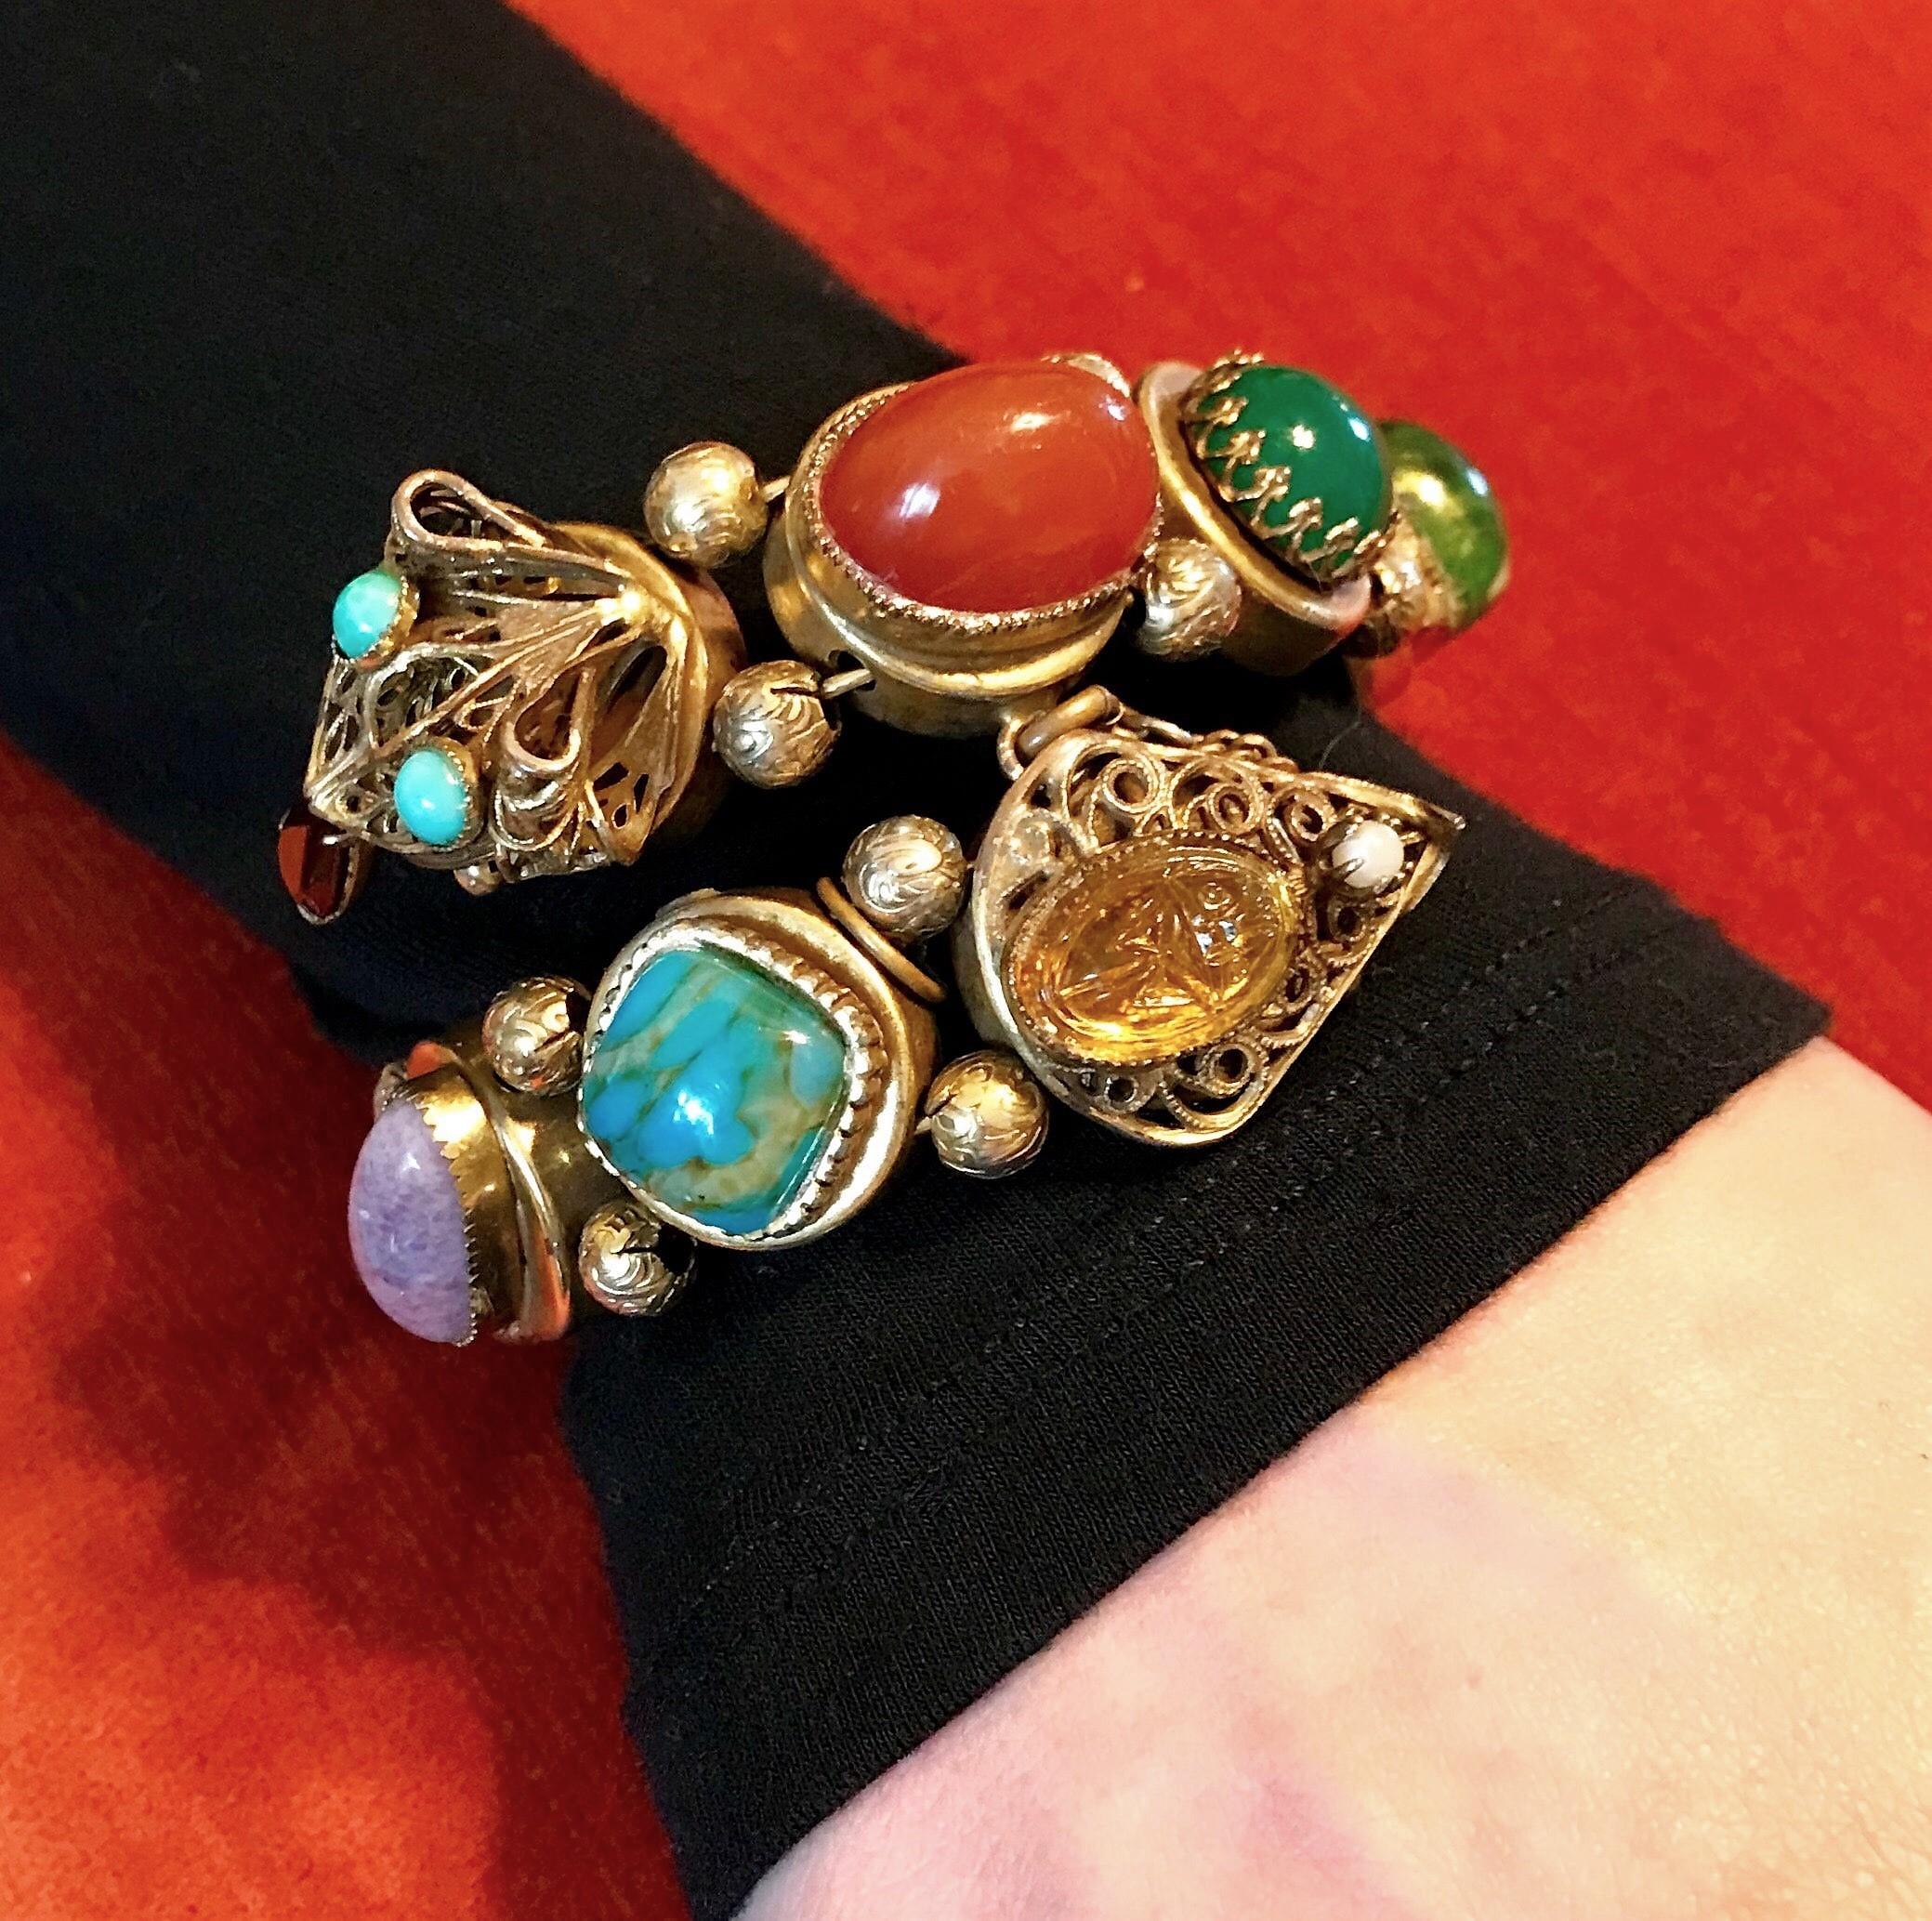 Circa 1940s gold tone metal wrap bracelet bezel set with large glass cabochons in carnelian, jade, turquoise and amethyst colors with a topaz glass molded scarab stone on one end and a filigree snake head on the other end set with faux-turquoise